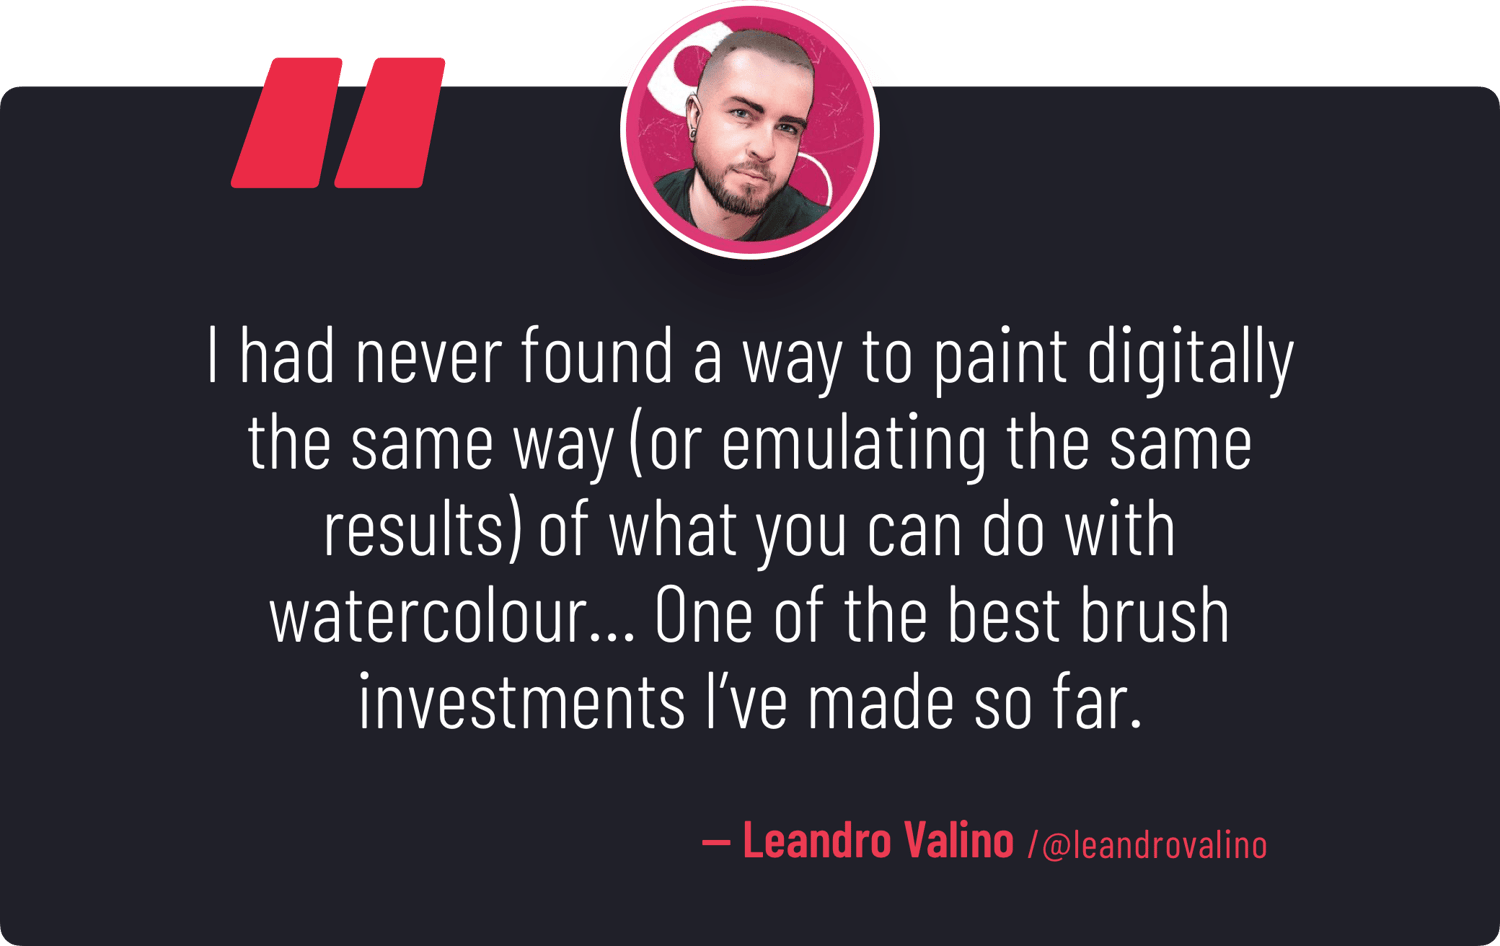 "I had never found a way to paint digitally the same way (or emulating the same results) of what you can do with [ArtyStack's] Watercolor Brushes… One of the best brush investments I've made so far." — Leandro Valino